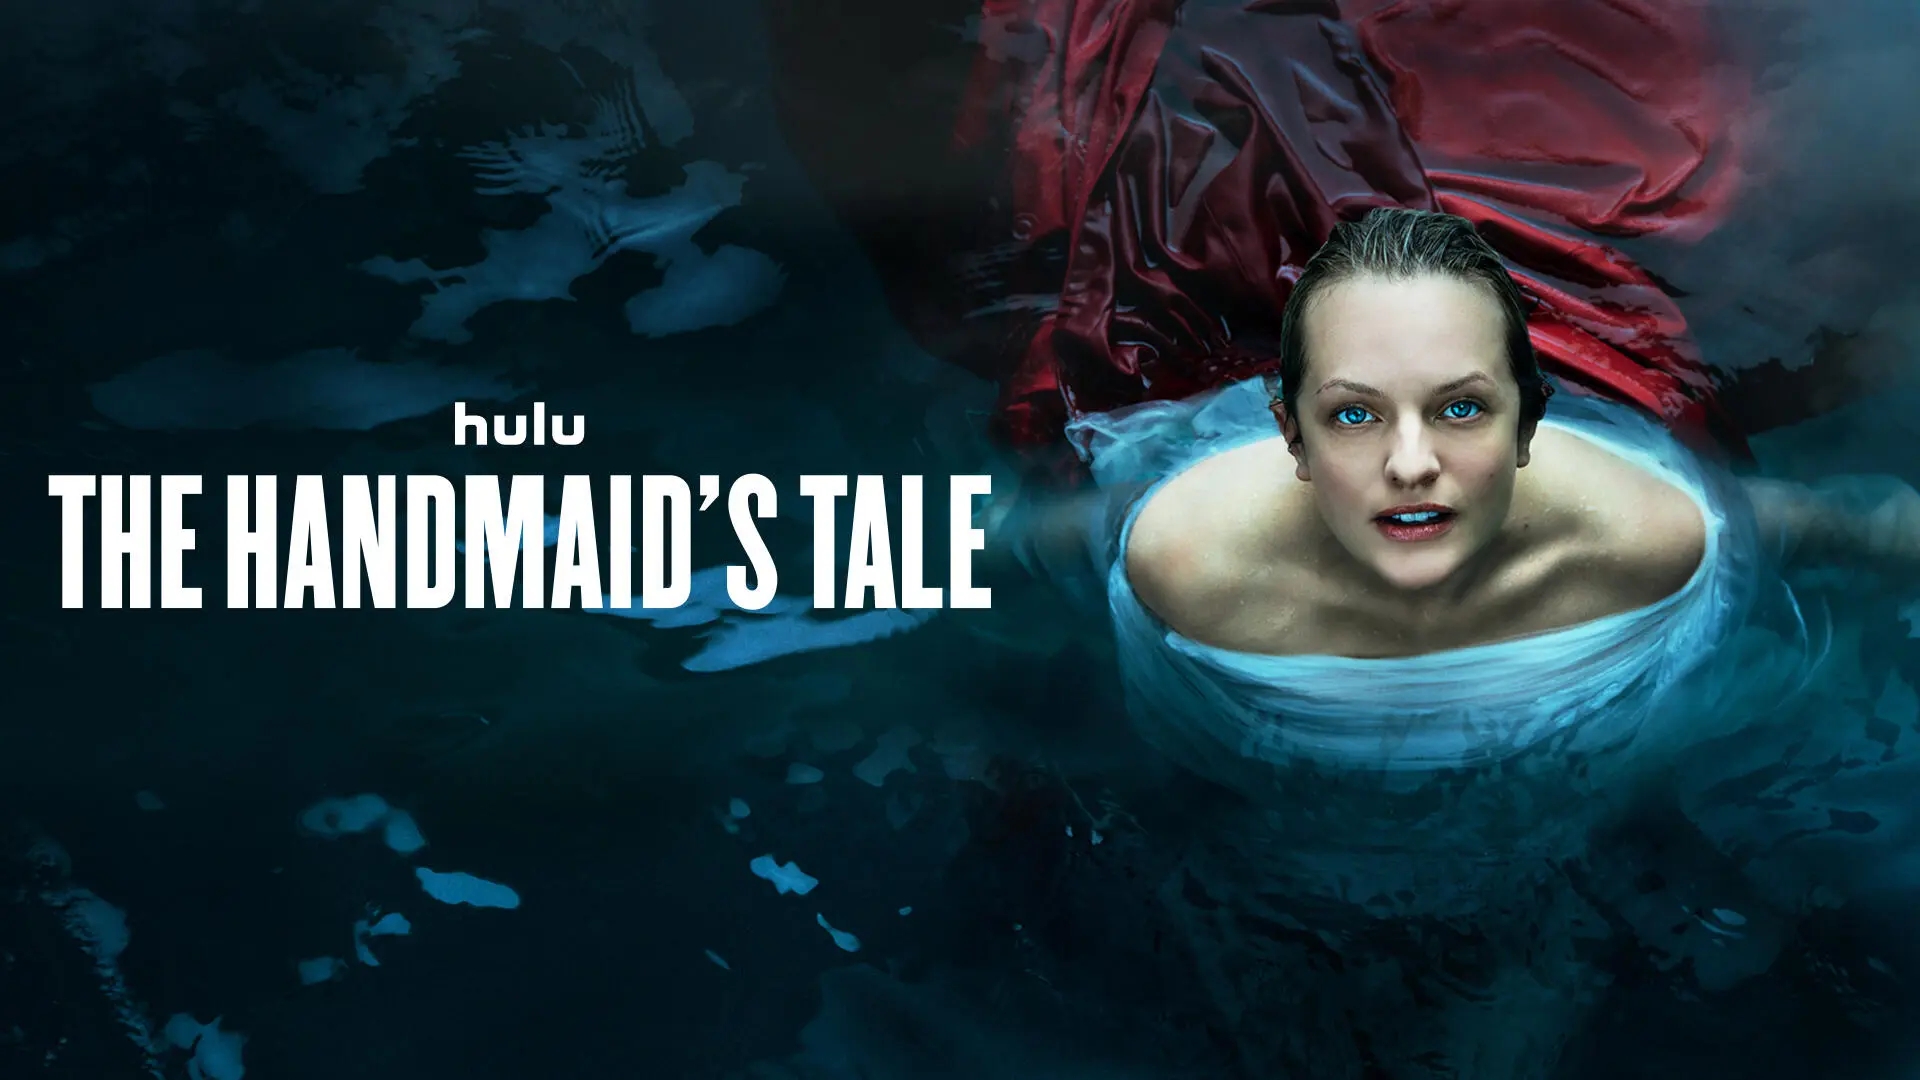 Promotional art for season 5 of the handmaids tale